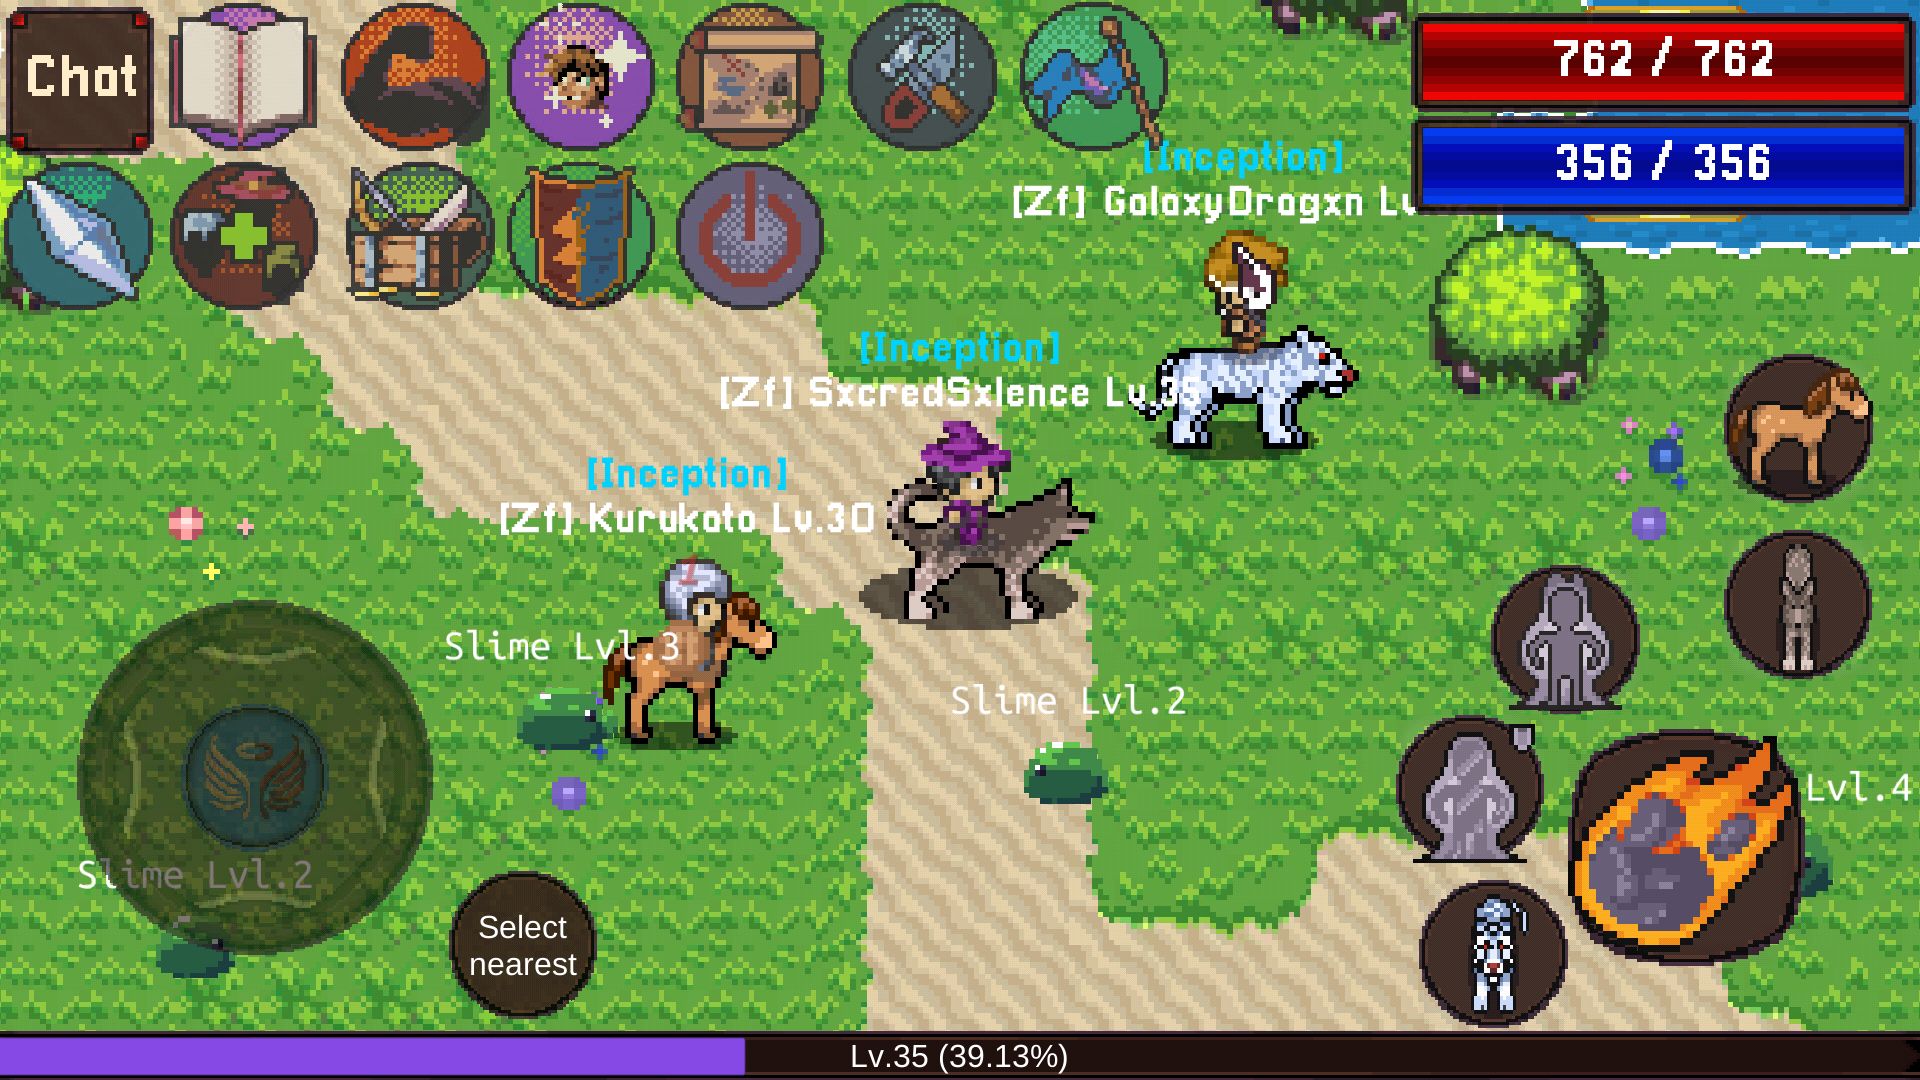 Download Elysium Online - MMORPG (Alpha) Android free game.